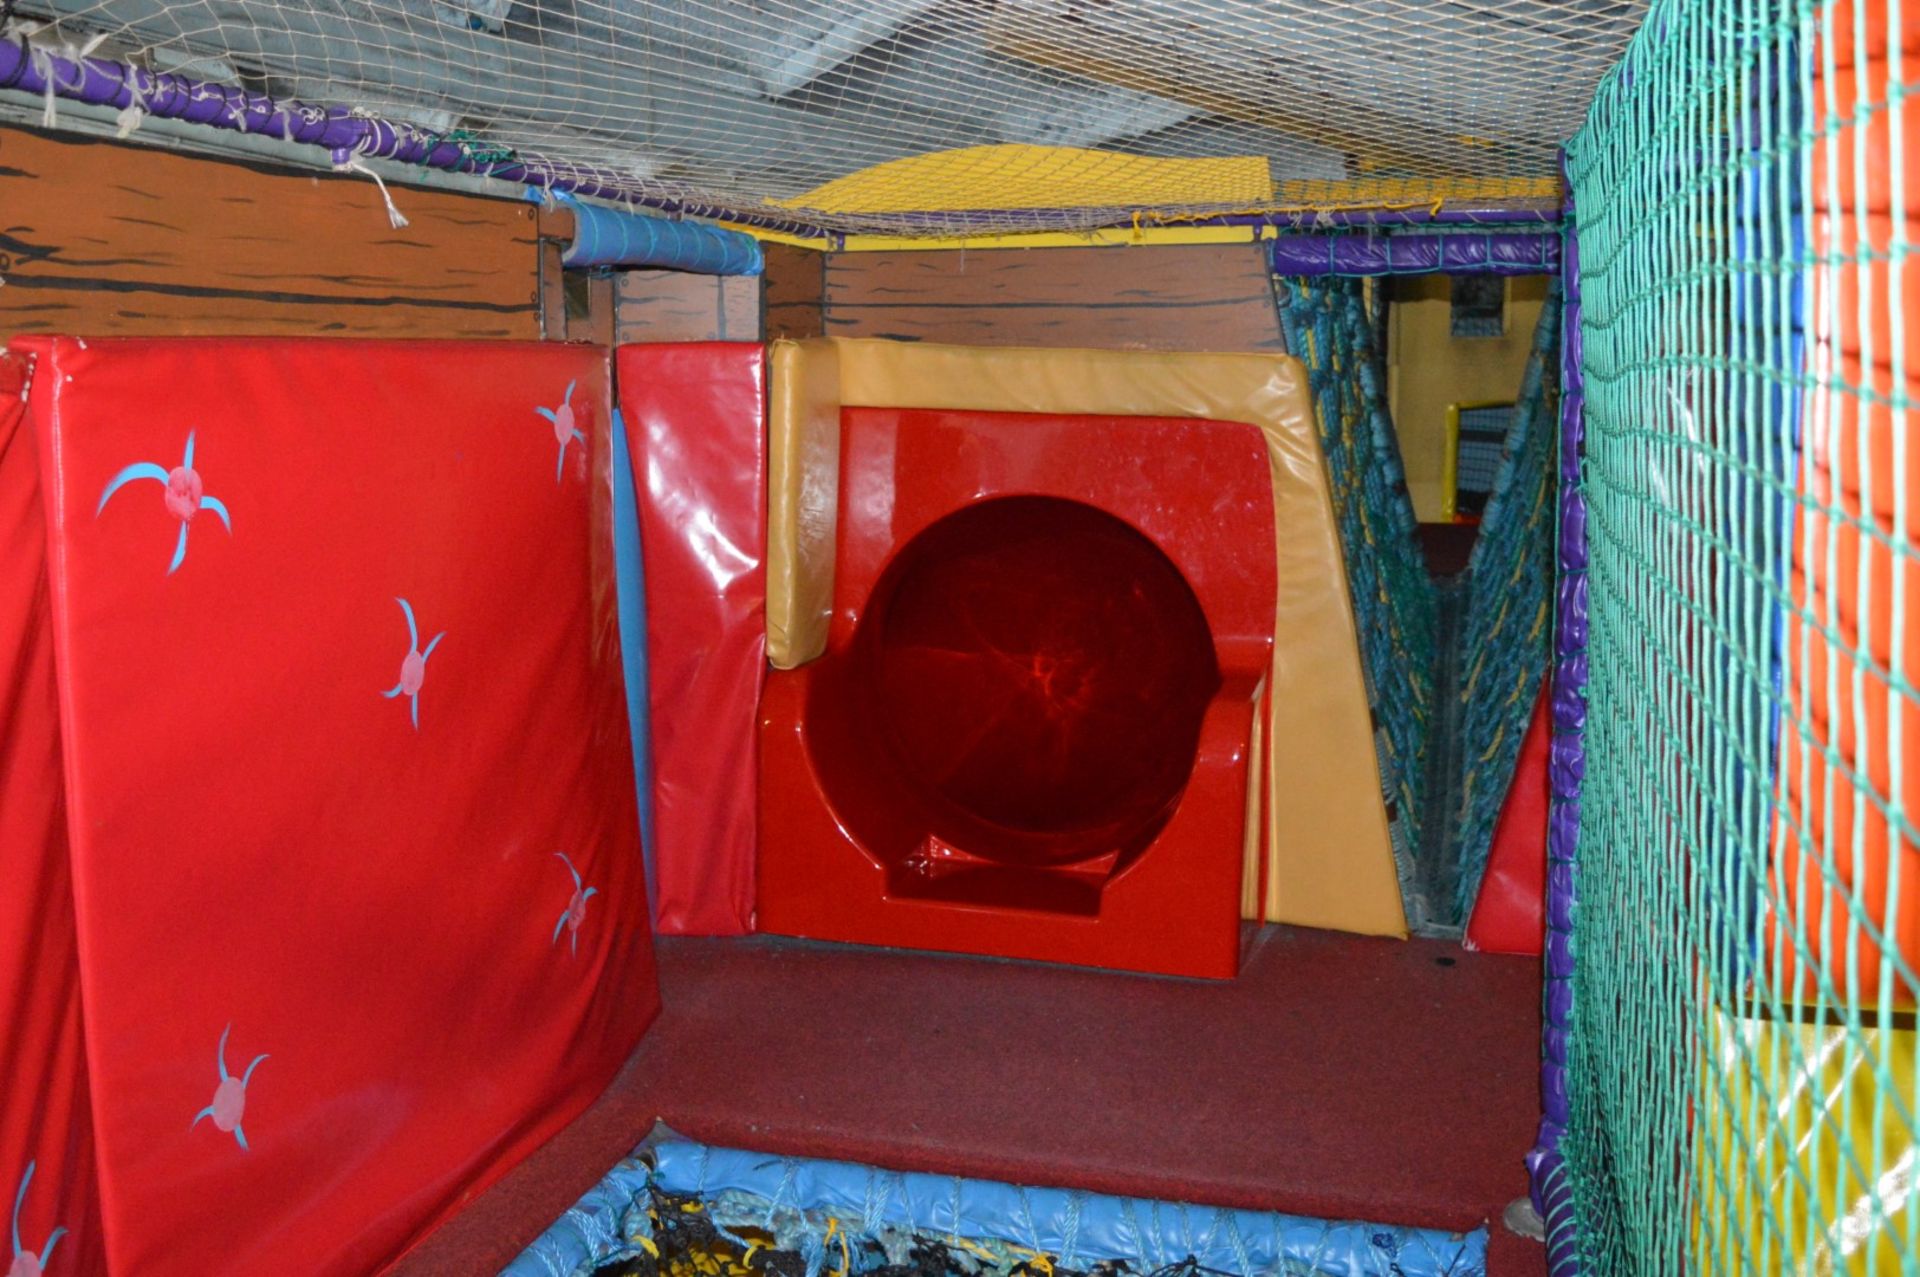 1 x Large Amount of Playcentre Safety Padding and Netting - Includes Lots of Various Designs and - Image 12 of 25